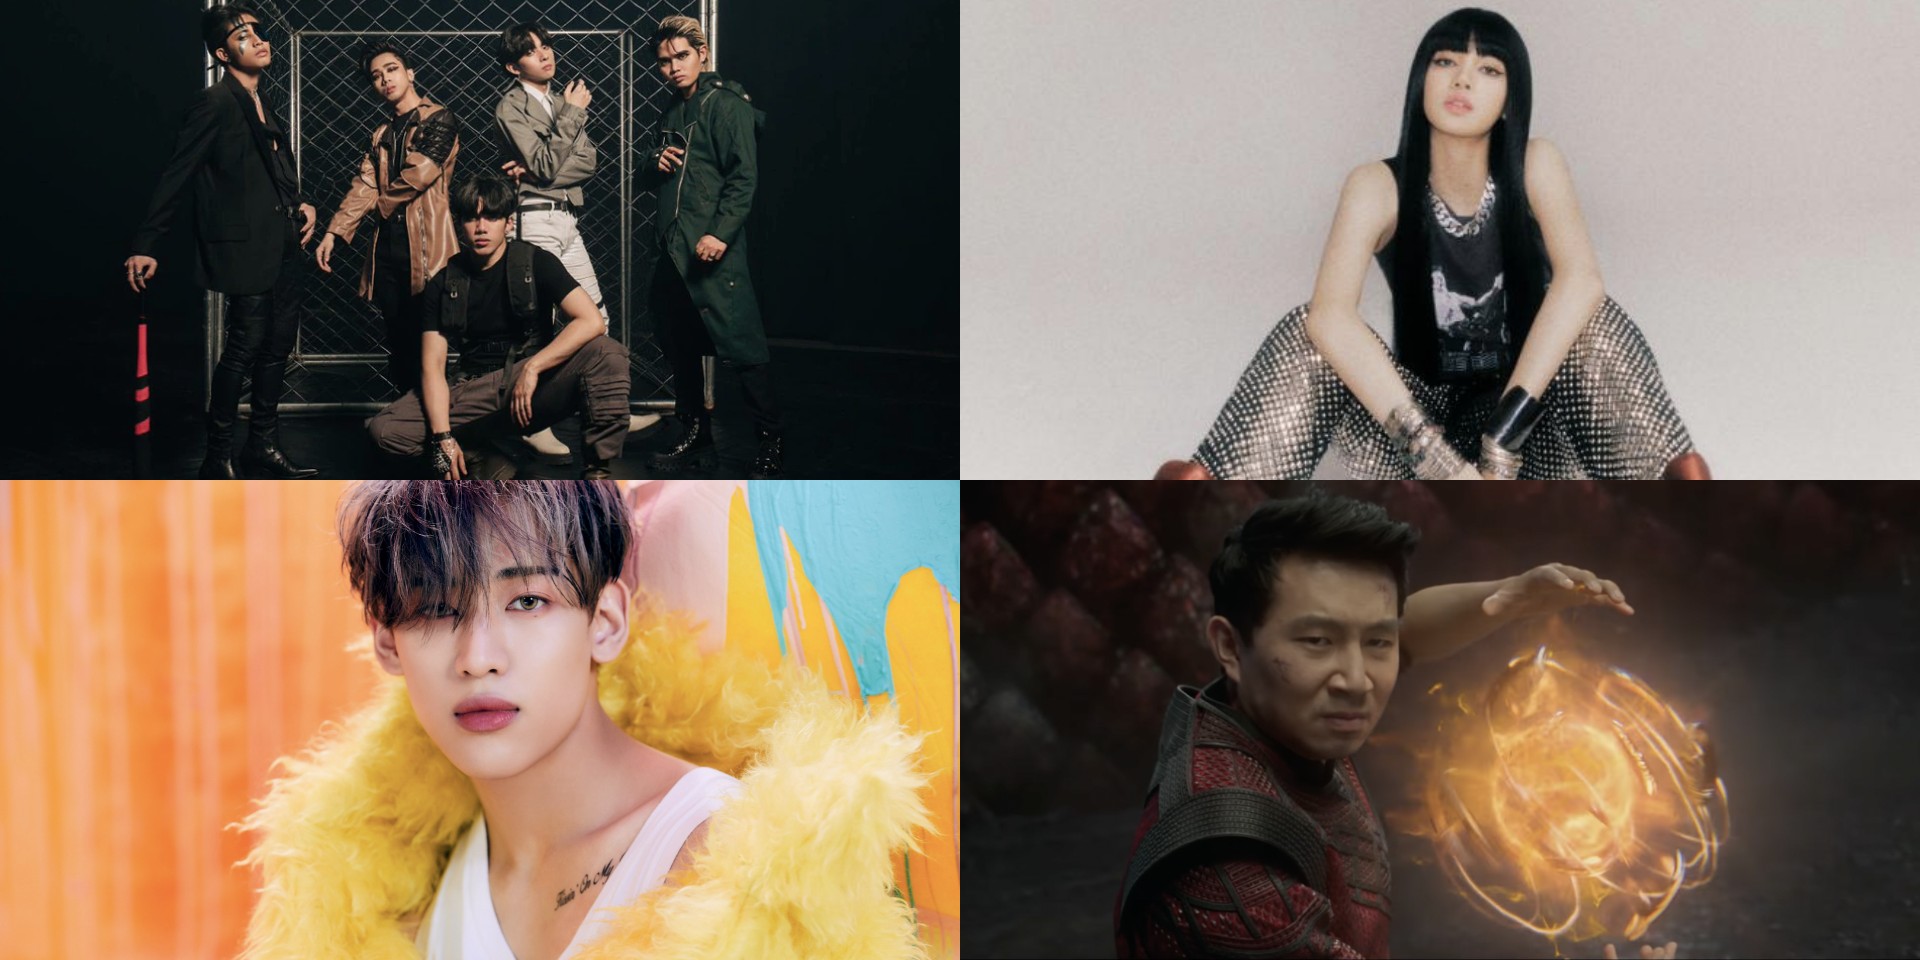 Here's what Southeast Asia talked about on Twitter in 2021: SB19, GOT7's BamBam, Shang-Chi, BLACKPINK's LISA and more